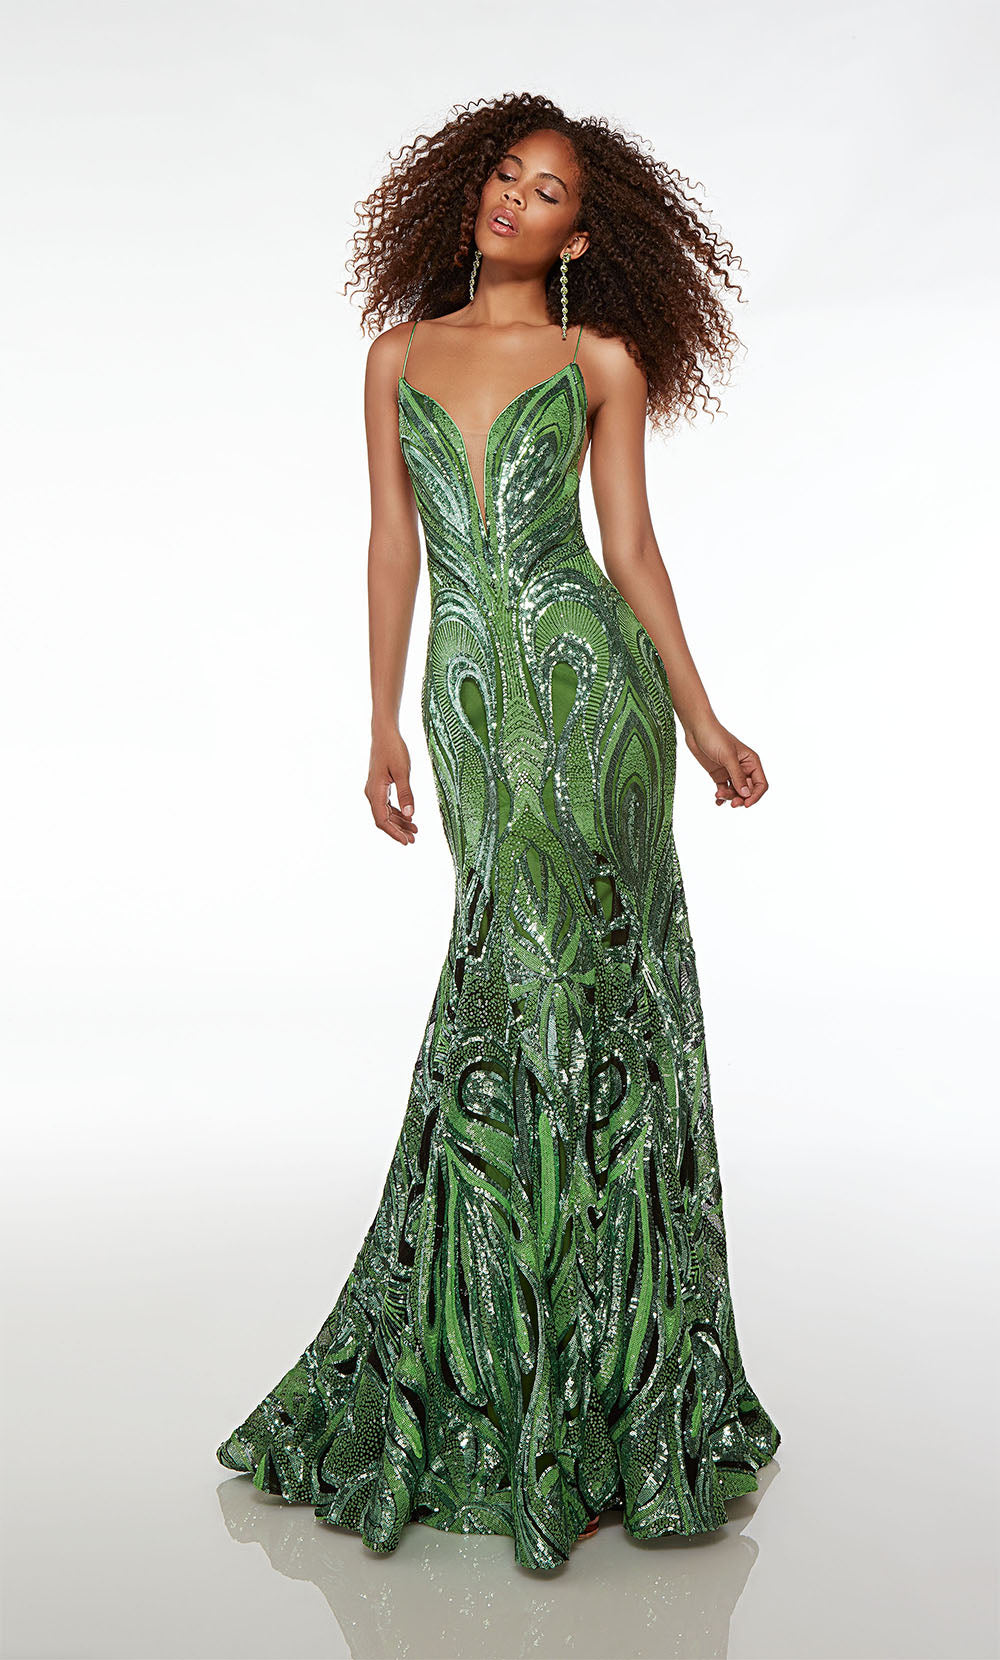 Alyce-61564-Plunging-Neckline-Lace-up-Back-Illusion-Side-Cutouts-Sequins-Fit-N-Flare-Green-Evening-Dress-B-Chic-Fashions-Prom-Dress